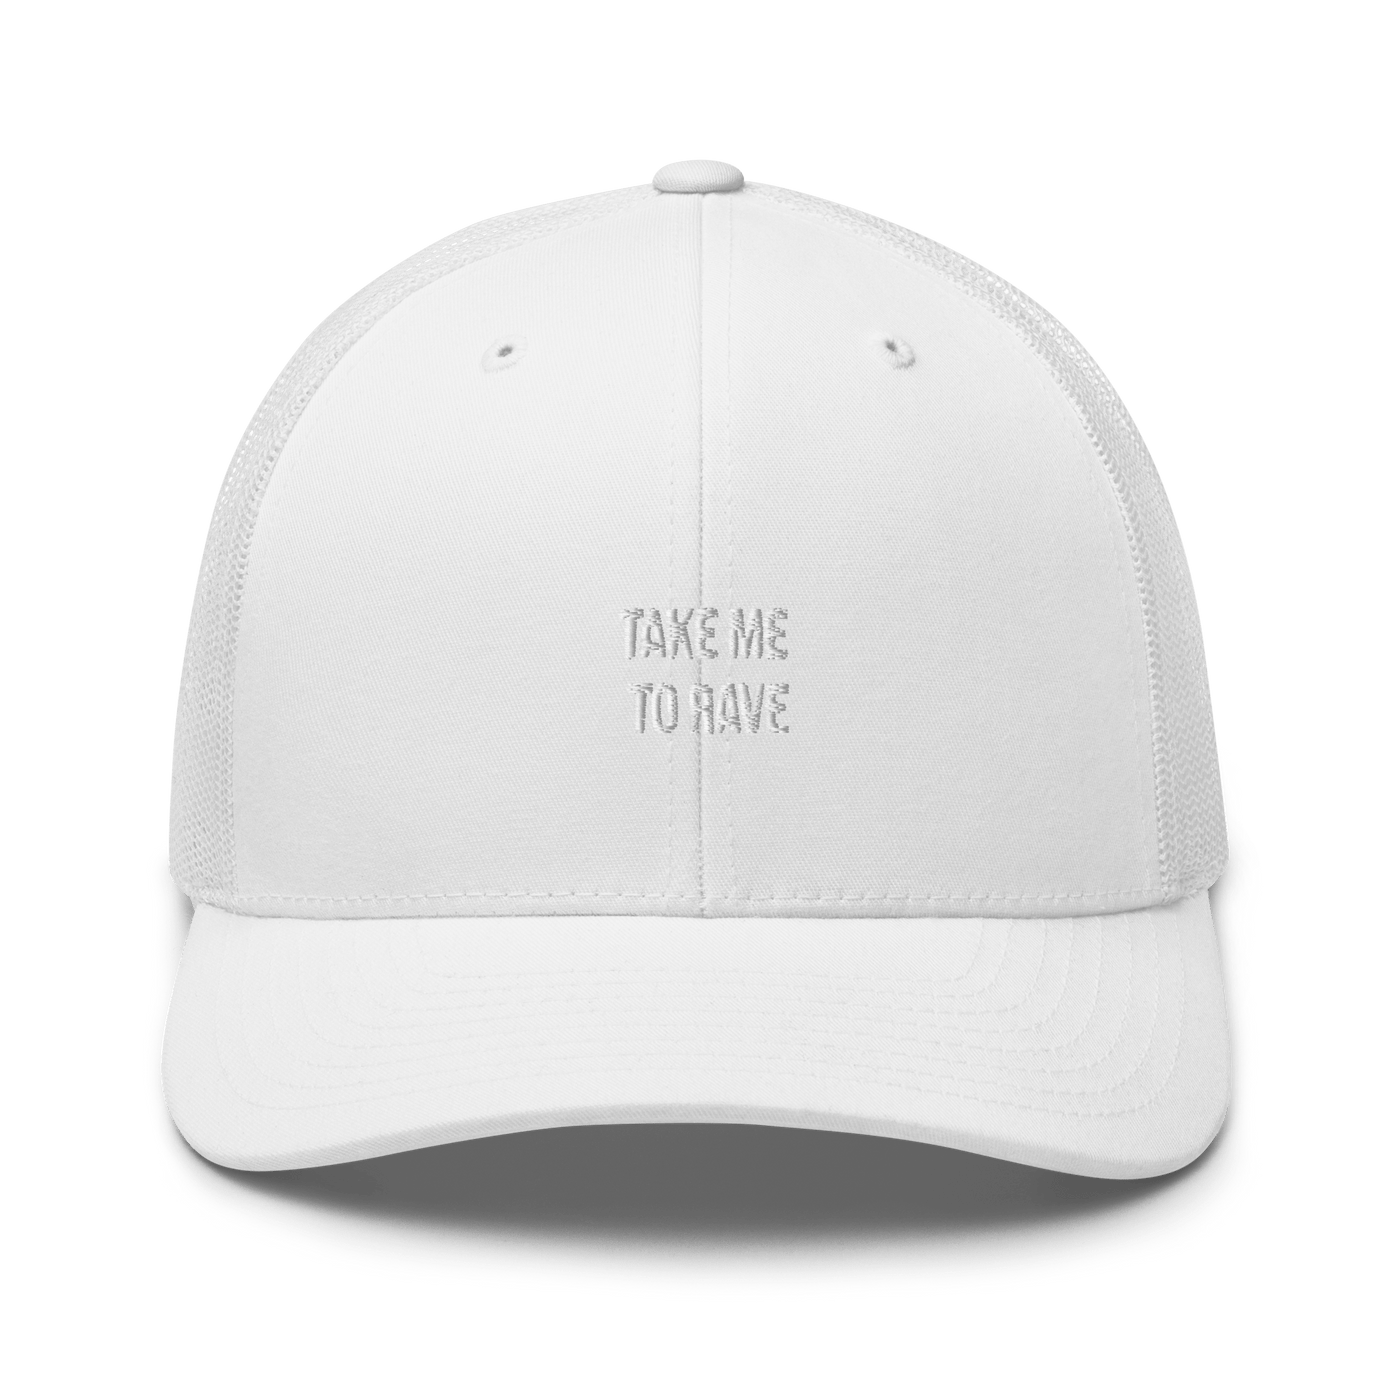 Take me to rave Trucker Cap - Khaki - - Just Another Cap Store